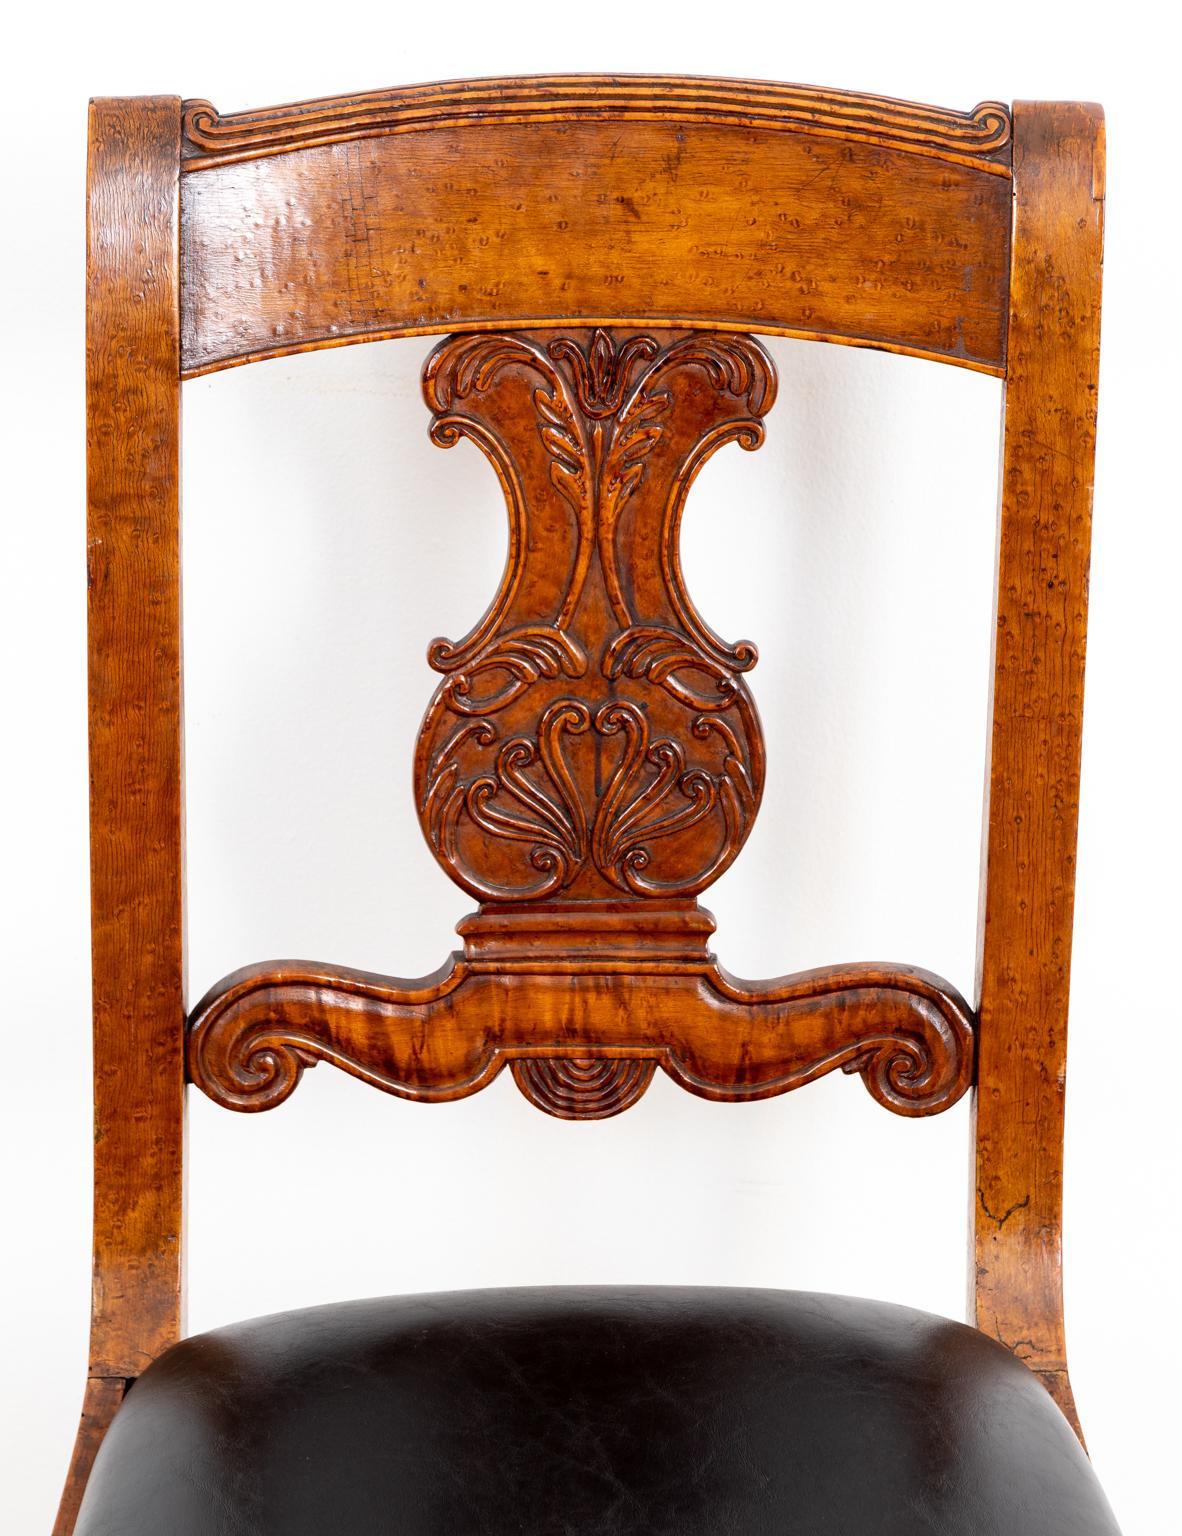 Set of six burled walnut dining chairs with leather upholstered slip seats, carved scrollwork and palmette back splats, and vase-and-ring turned legs, circa 1810. The chairs feature original patina. Please note of wear consistent with antique age